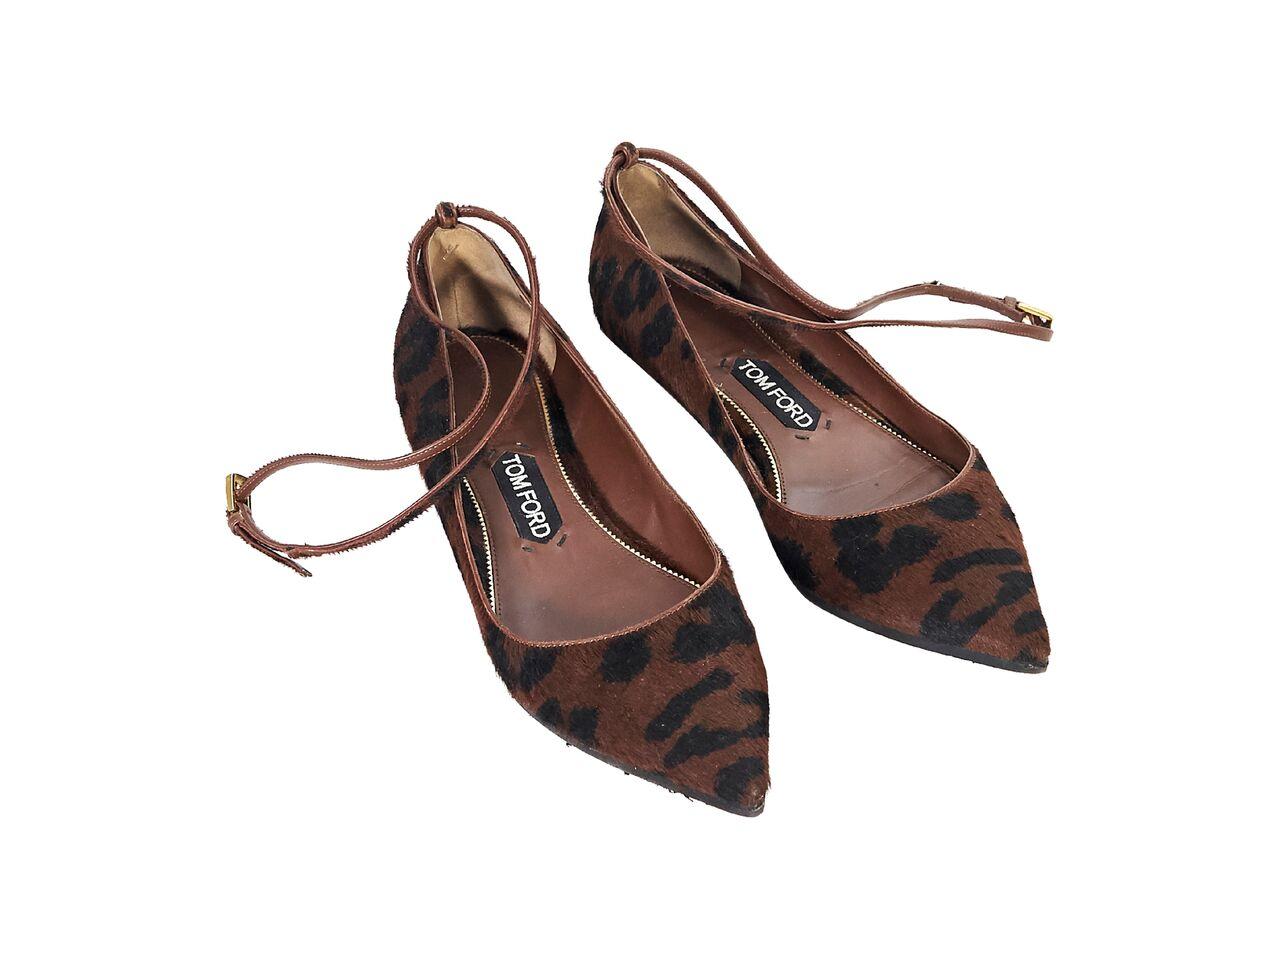 Product details:  Brown and black animal-printed pony hair ballet flats by Tom Ford.  Adjustable ankle strap.  Point toe.  
Condition: Pre-owned. Very good. 
Est. Retail $ 1,195.00